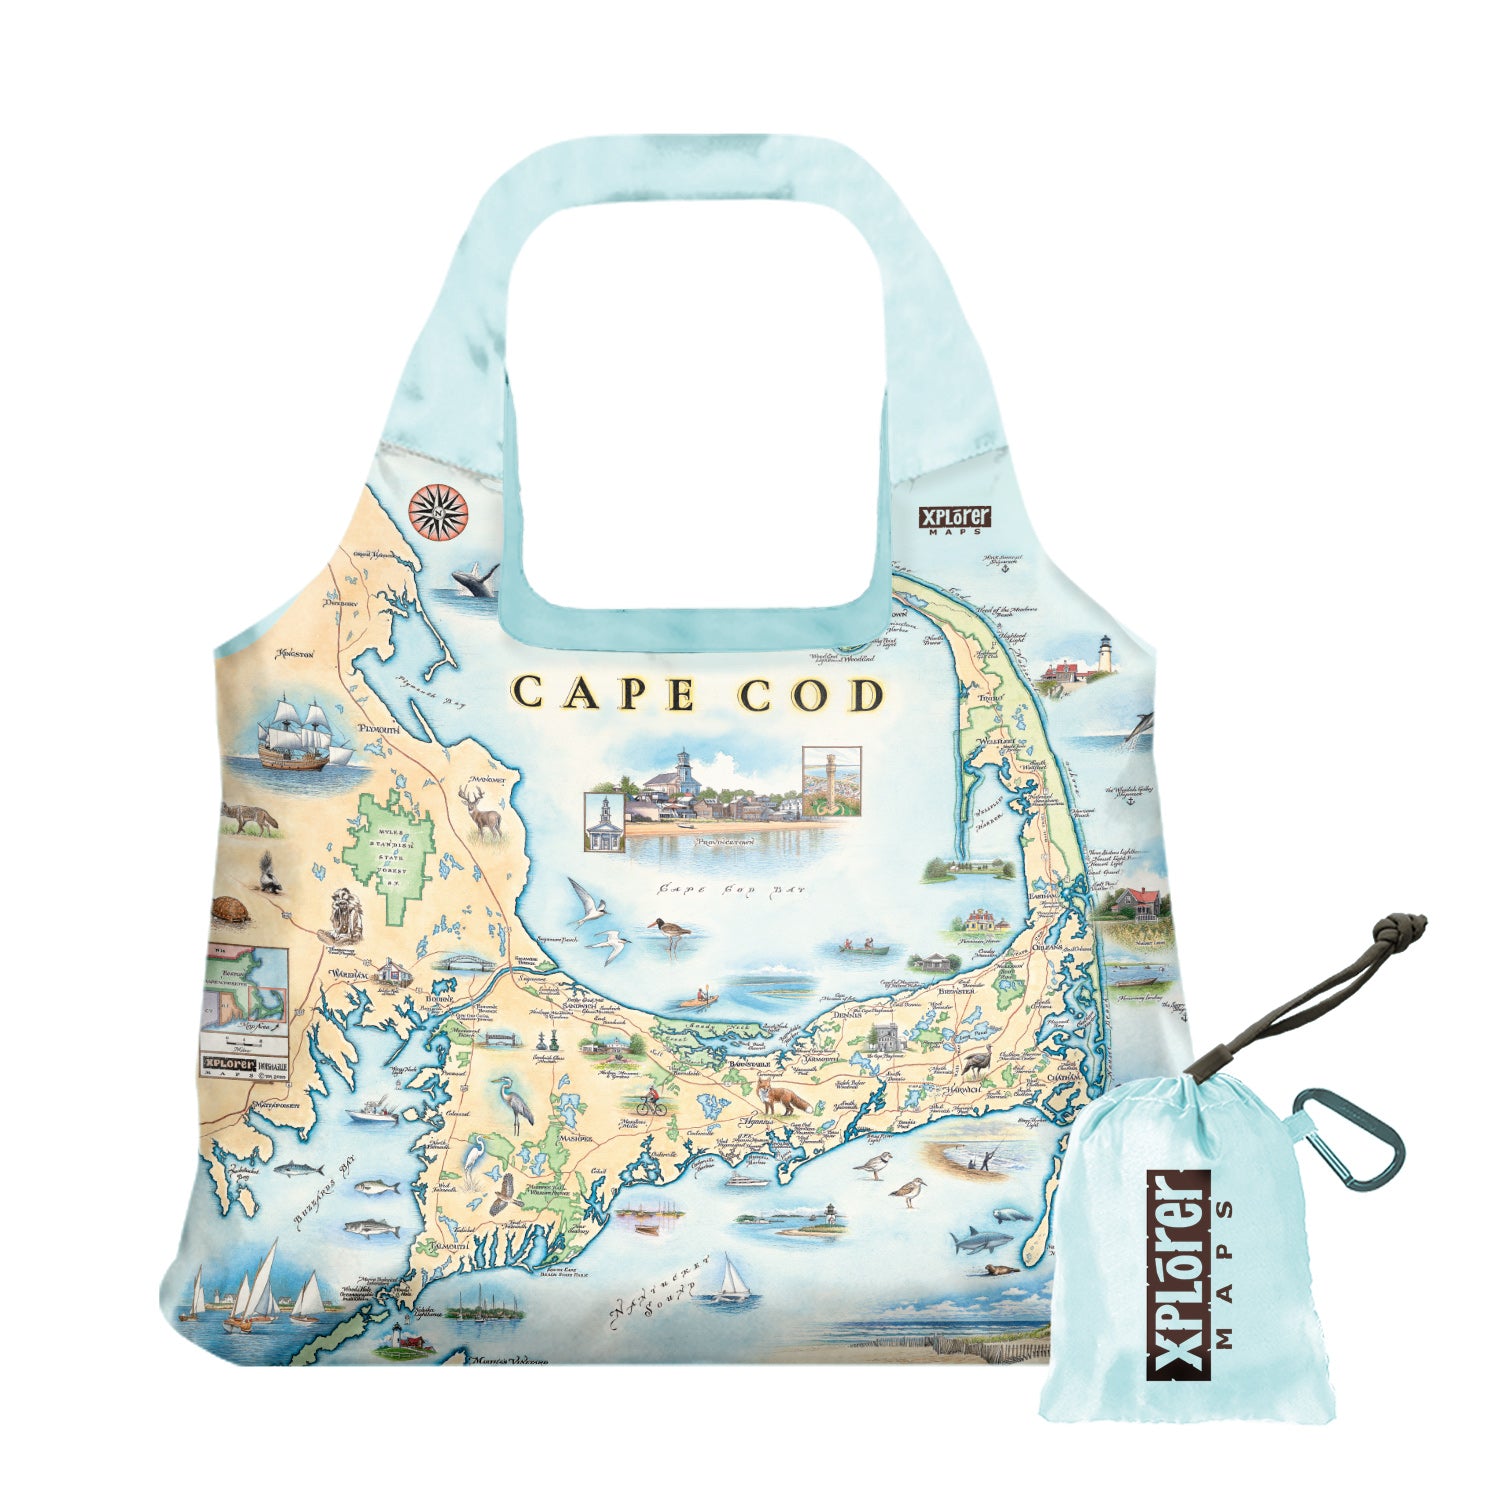 Cape Cod Map stuffable pouch tote bag in earth tone colors. Featuring Plymouth Rock, fish, crane, fox, Provincetown, canoeing, biking, beach, lighthouse, and ocean.